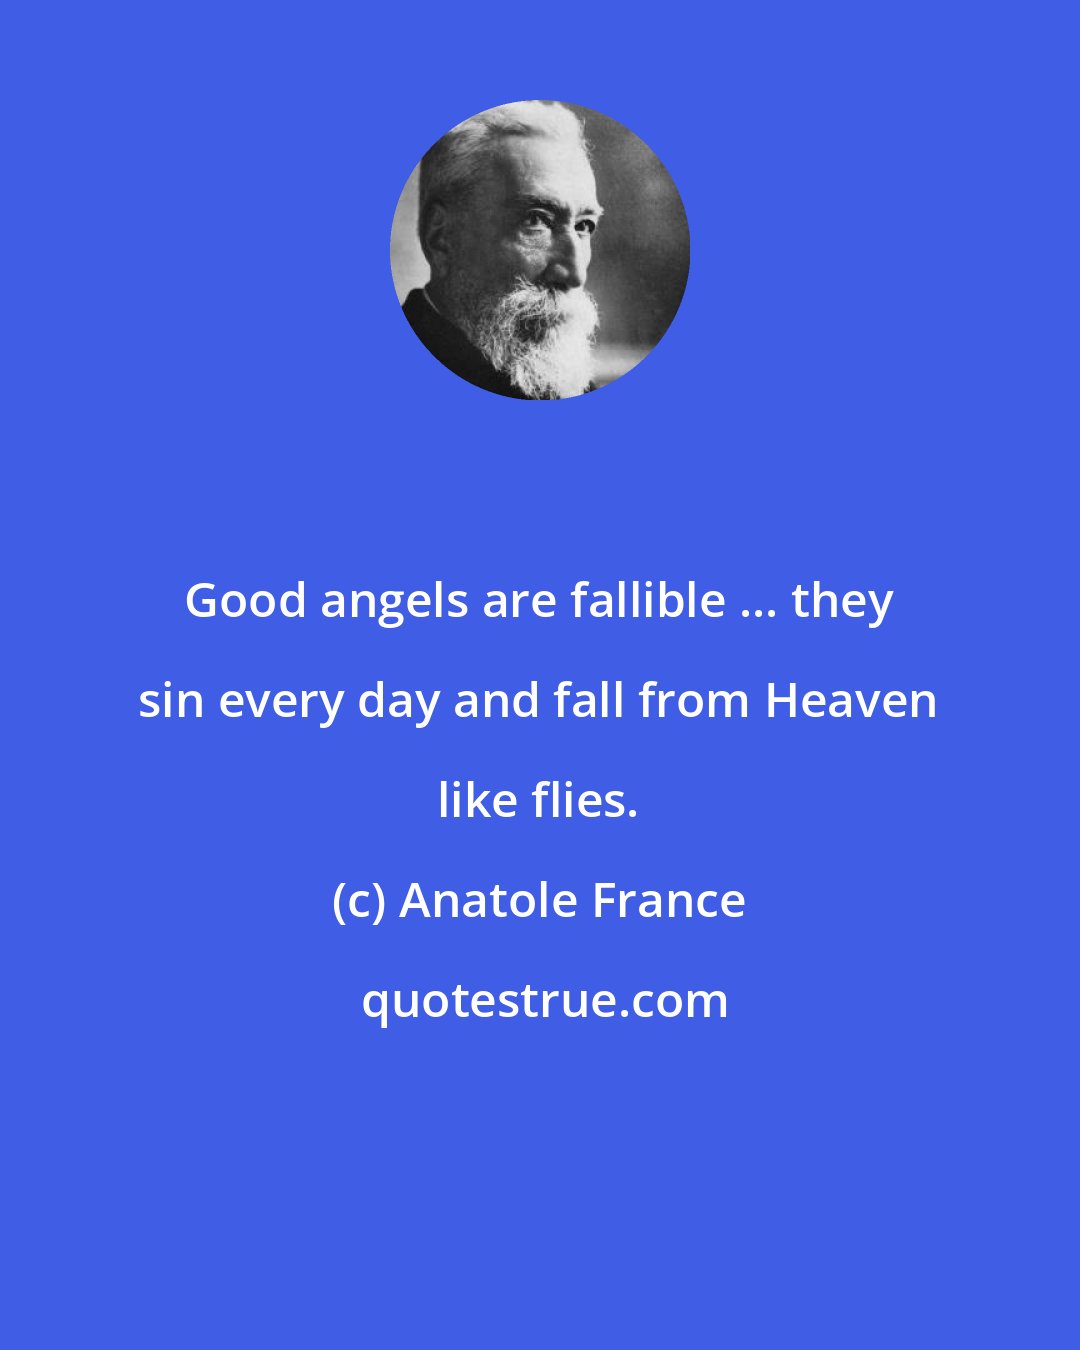 Anatole France: Good angels are fallible ... they sin every day and fall from Heaven like flies.